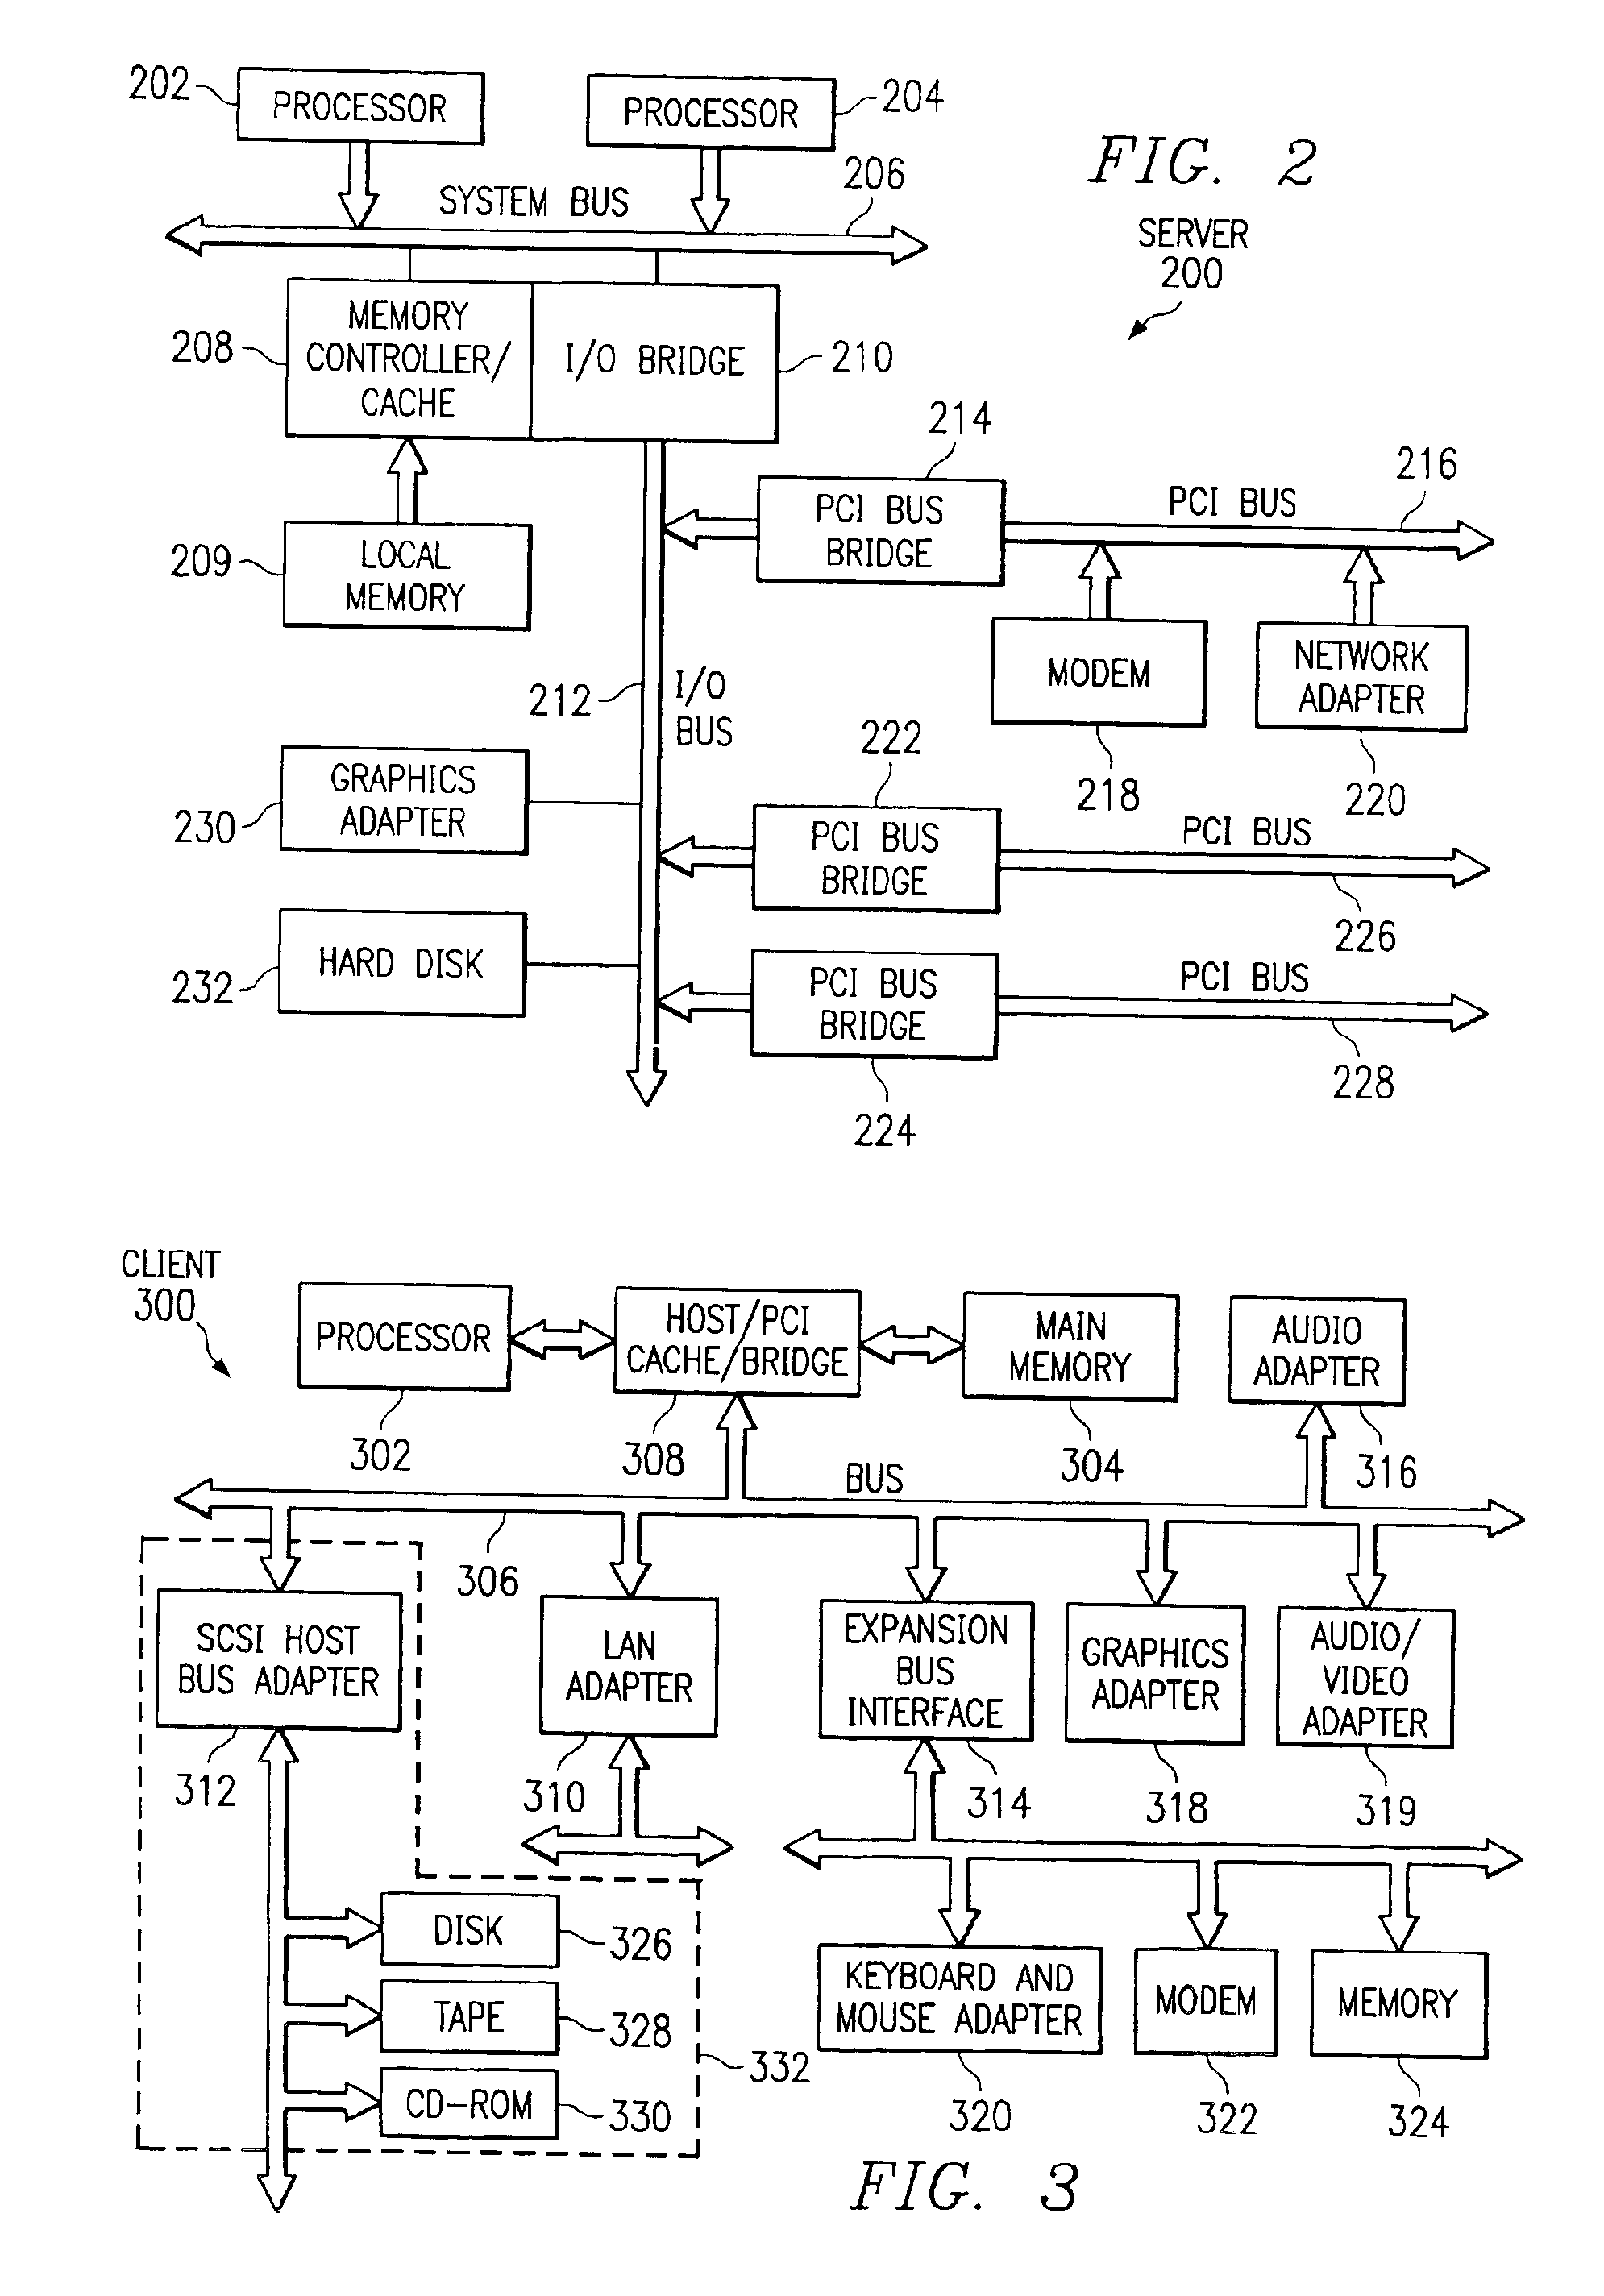 Method and apparatus for dynamic modification of internet firewalls using variably-weighted text rules